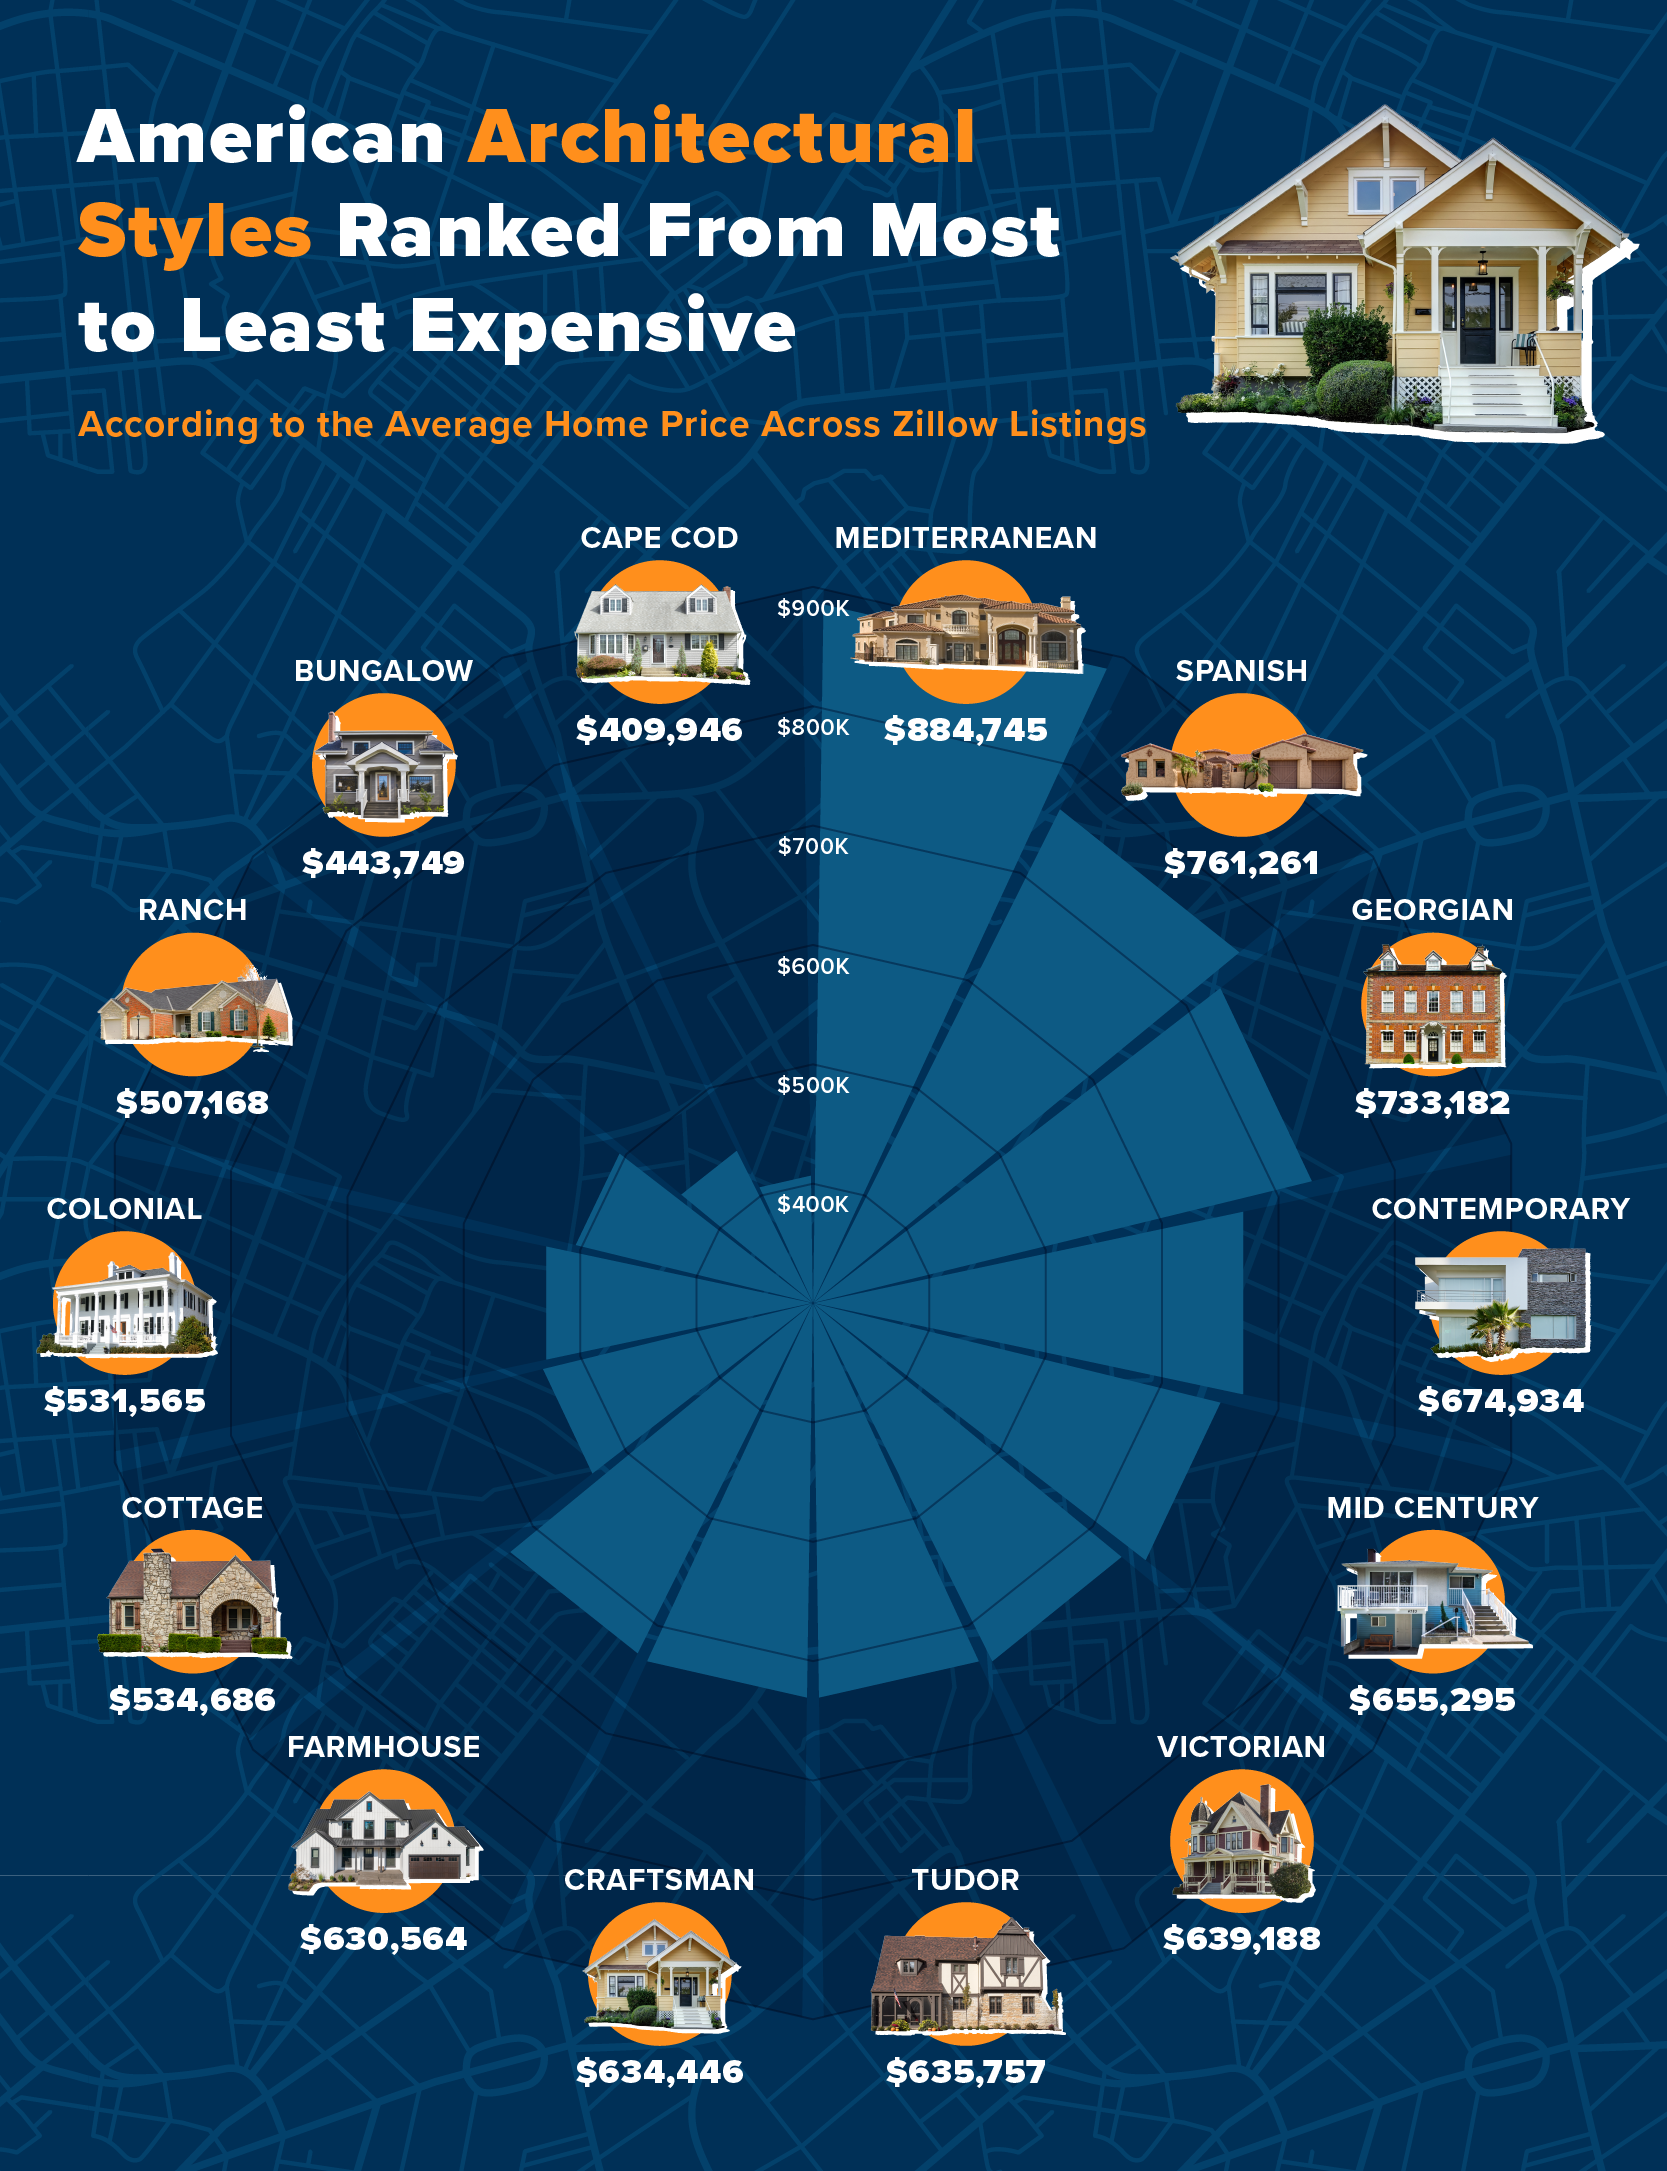 a chart ranking American architectural styles from most to least expensive